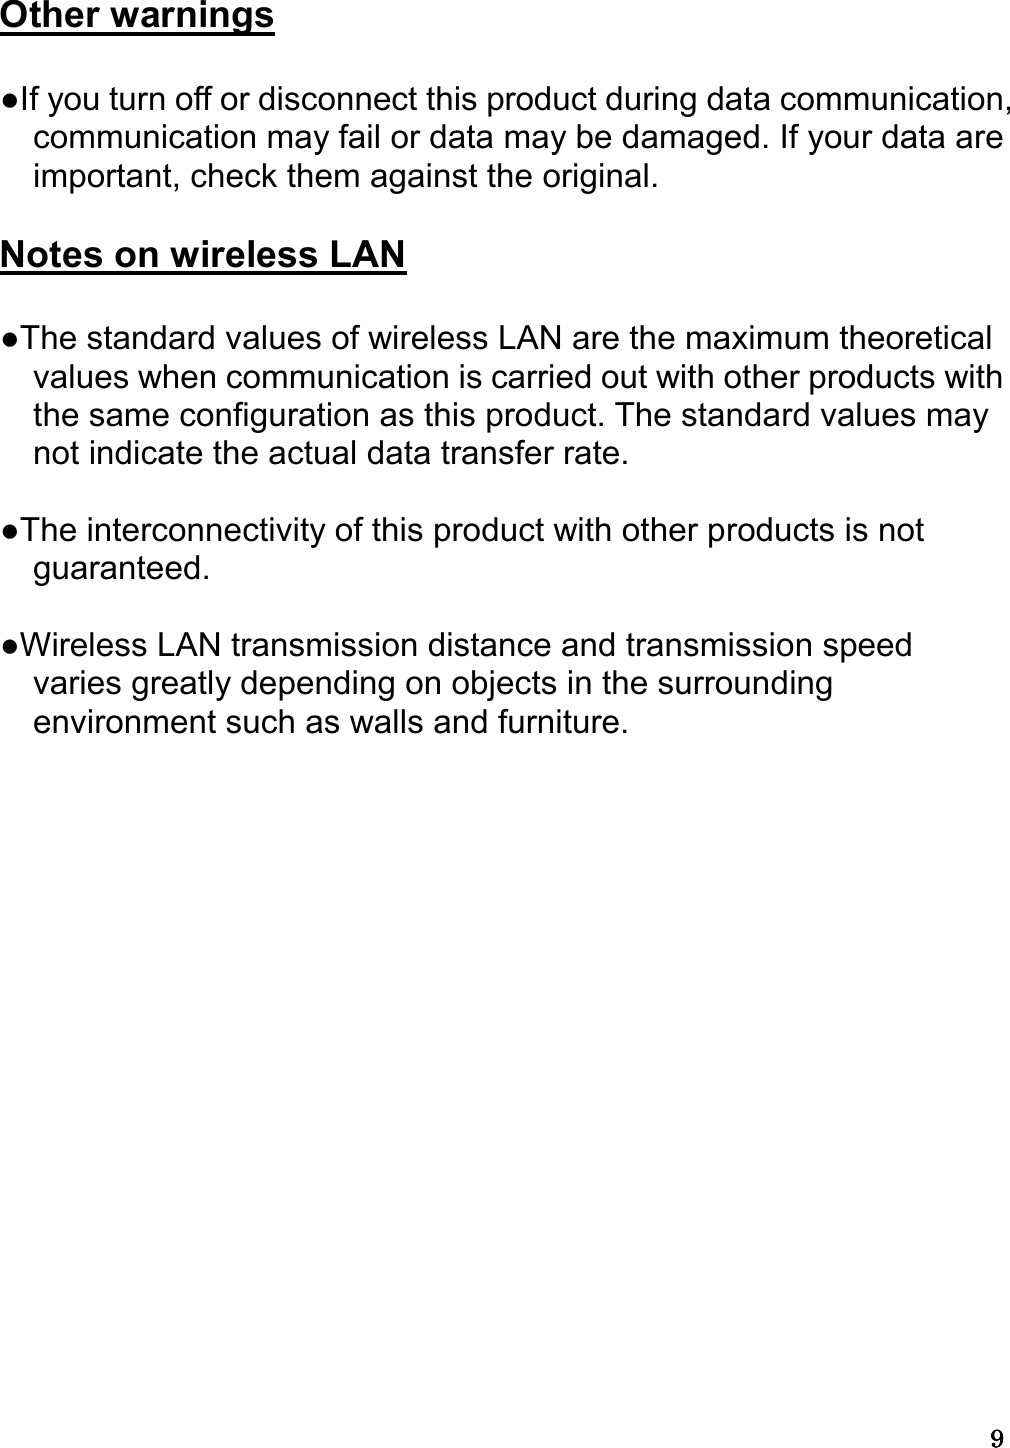 9999   Other warnings  ●If you turn off or disconnect this product during data communication, communication may fail or data may be damaged. If your data are important, check them against the original.  Notes on wireless LAN  ●The standard values of wireless LAN are the maximum theoretical values when communication is carried out with other products with the same configuration as this product. The standard values may not indicate the actual data transfer rate.  ●The interconnectivity of this product with other products is not guaranteed.  ●Wireless LAN transmission distance and transmission speed varies greatly depending on objects in the surrounding environment such as walls and furniture.     